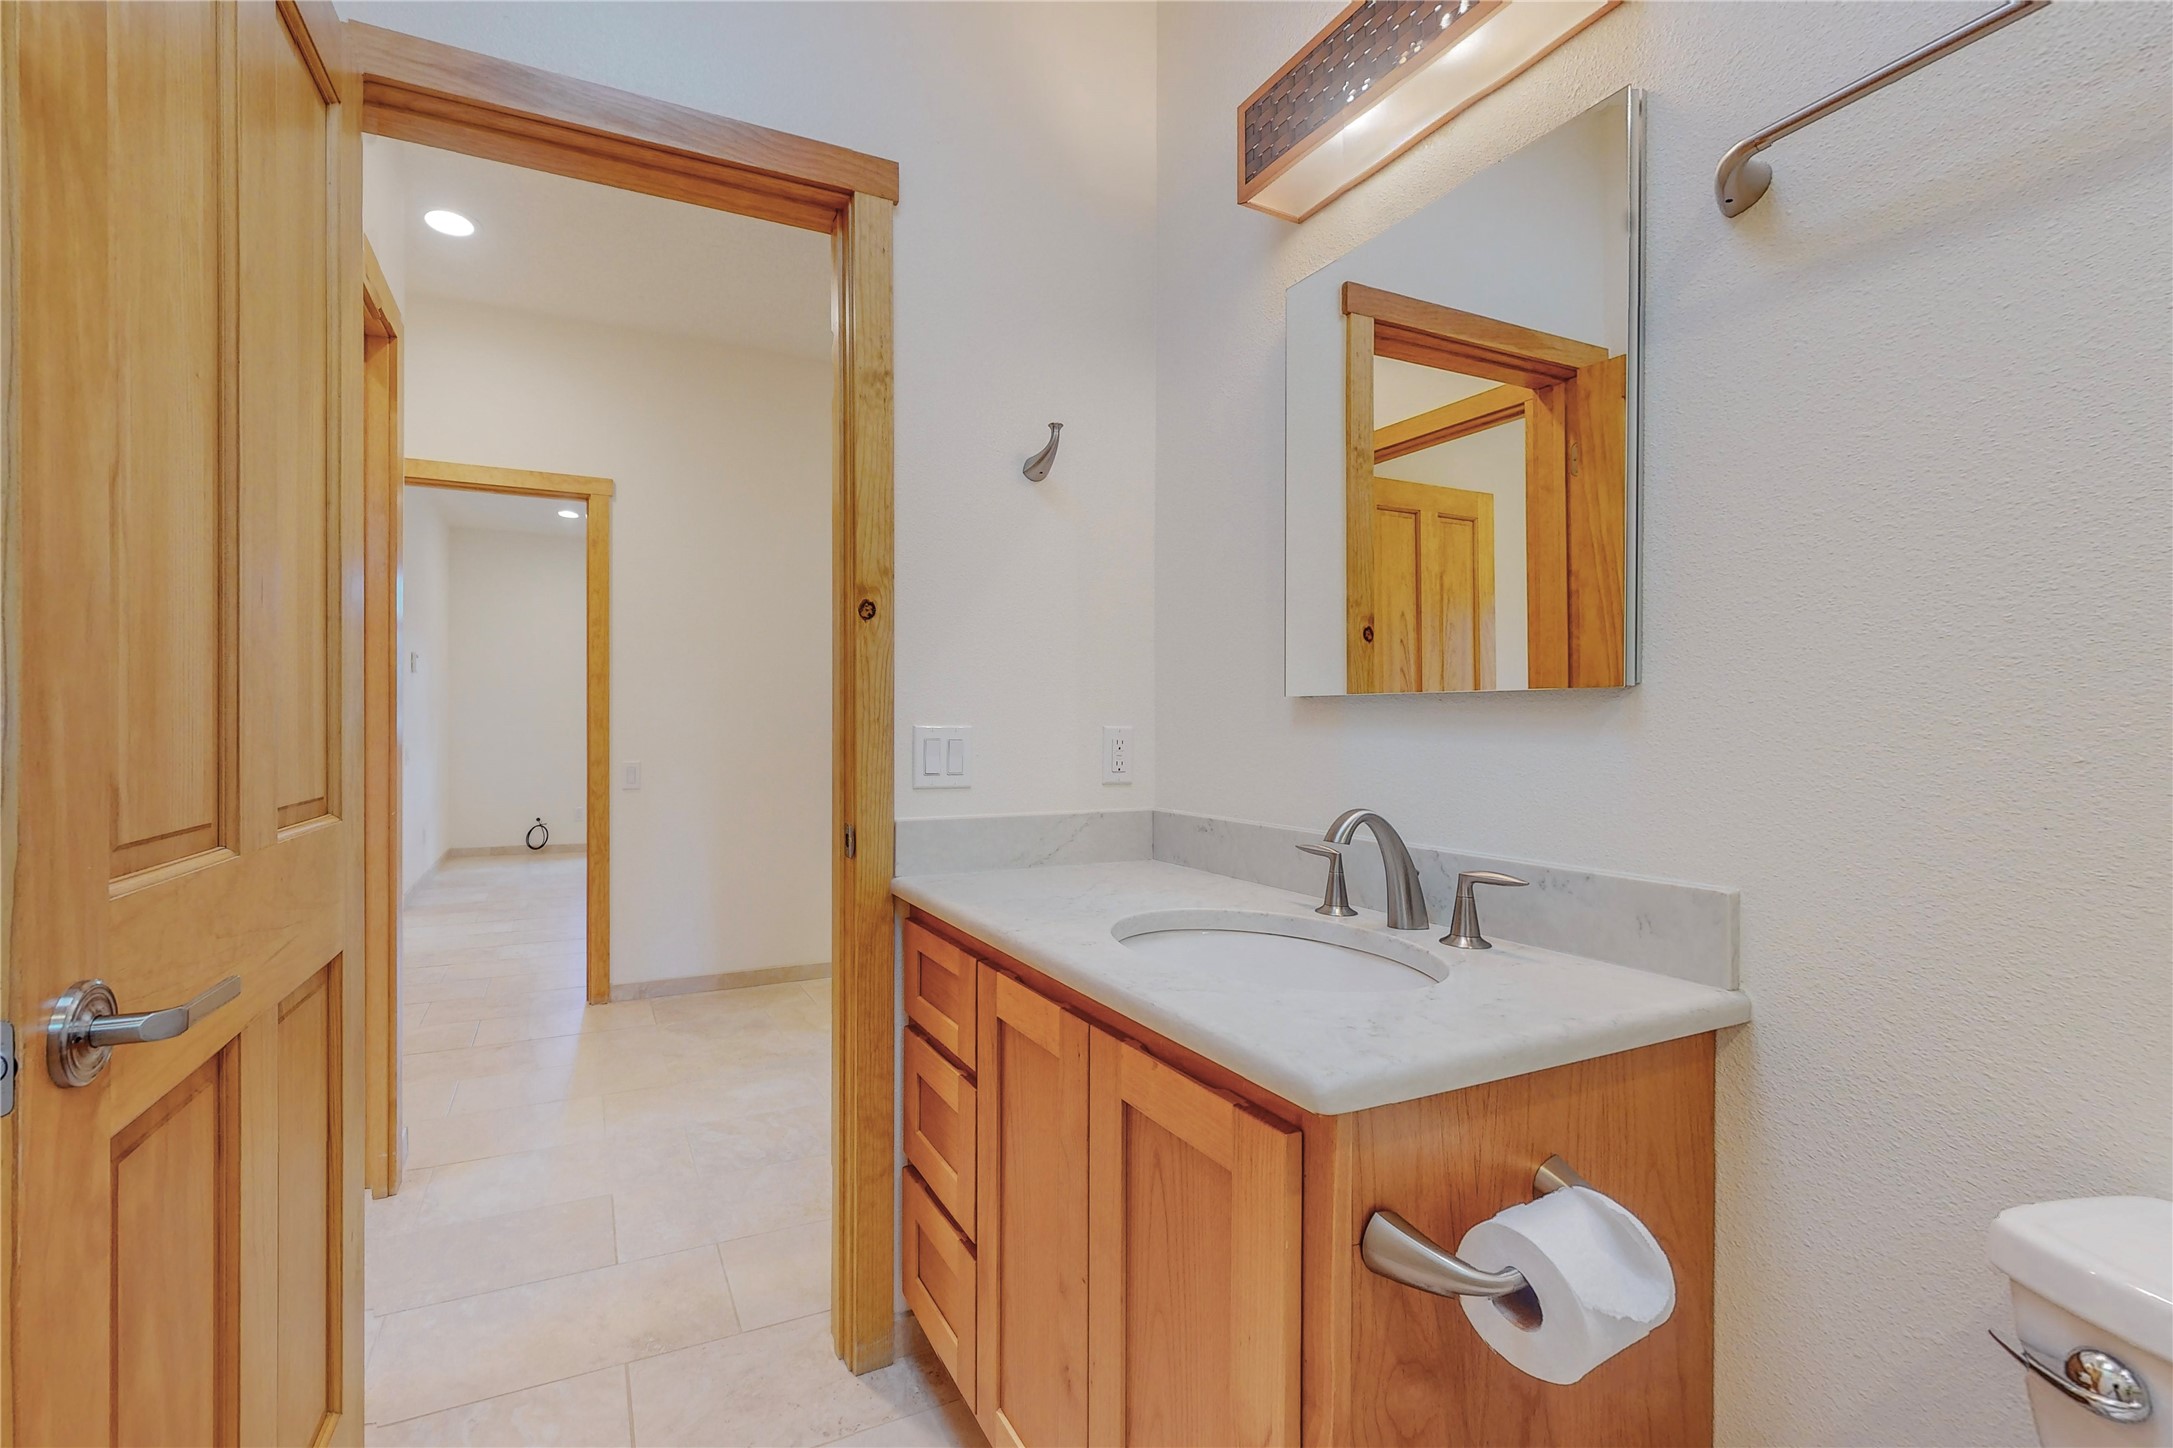 46 Silver Feather Trail, Pecos, New Mexico 87552, 2 Bedrooms Bedrooms, ,3 BathroomsBathrooms,Residential,For Sale,46 Silver Feather Trail,202233175